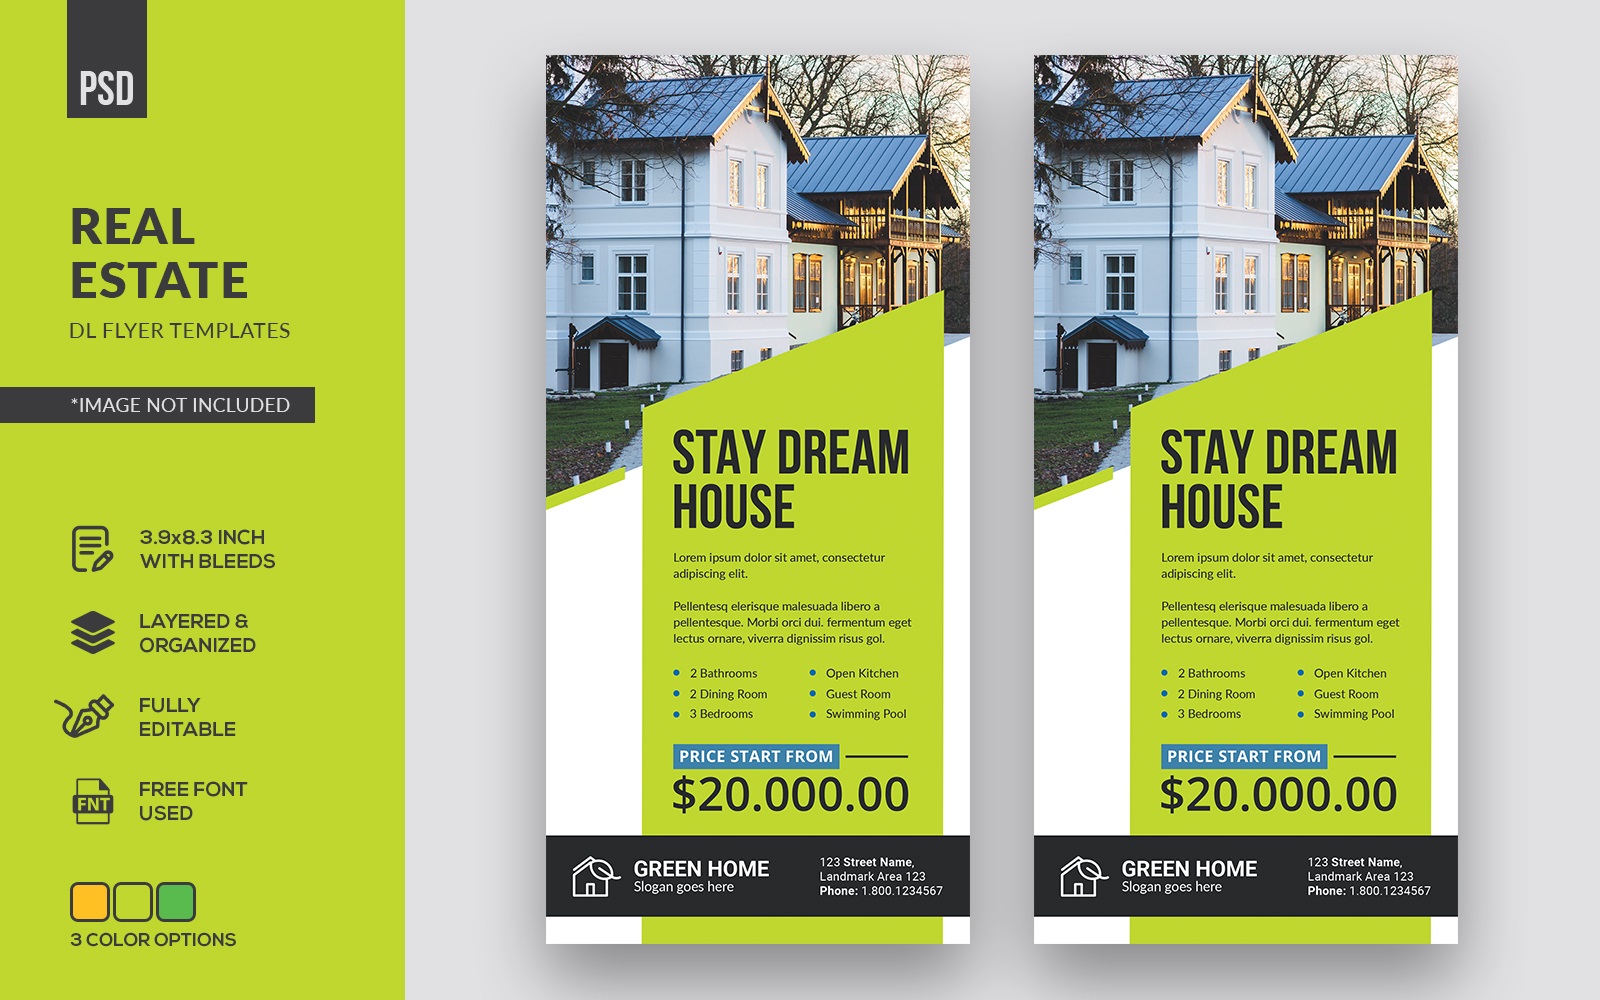 Real Estate DL Flyers - Corporate Identity Template